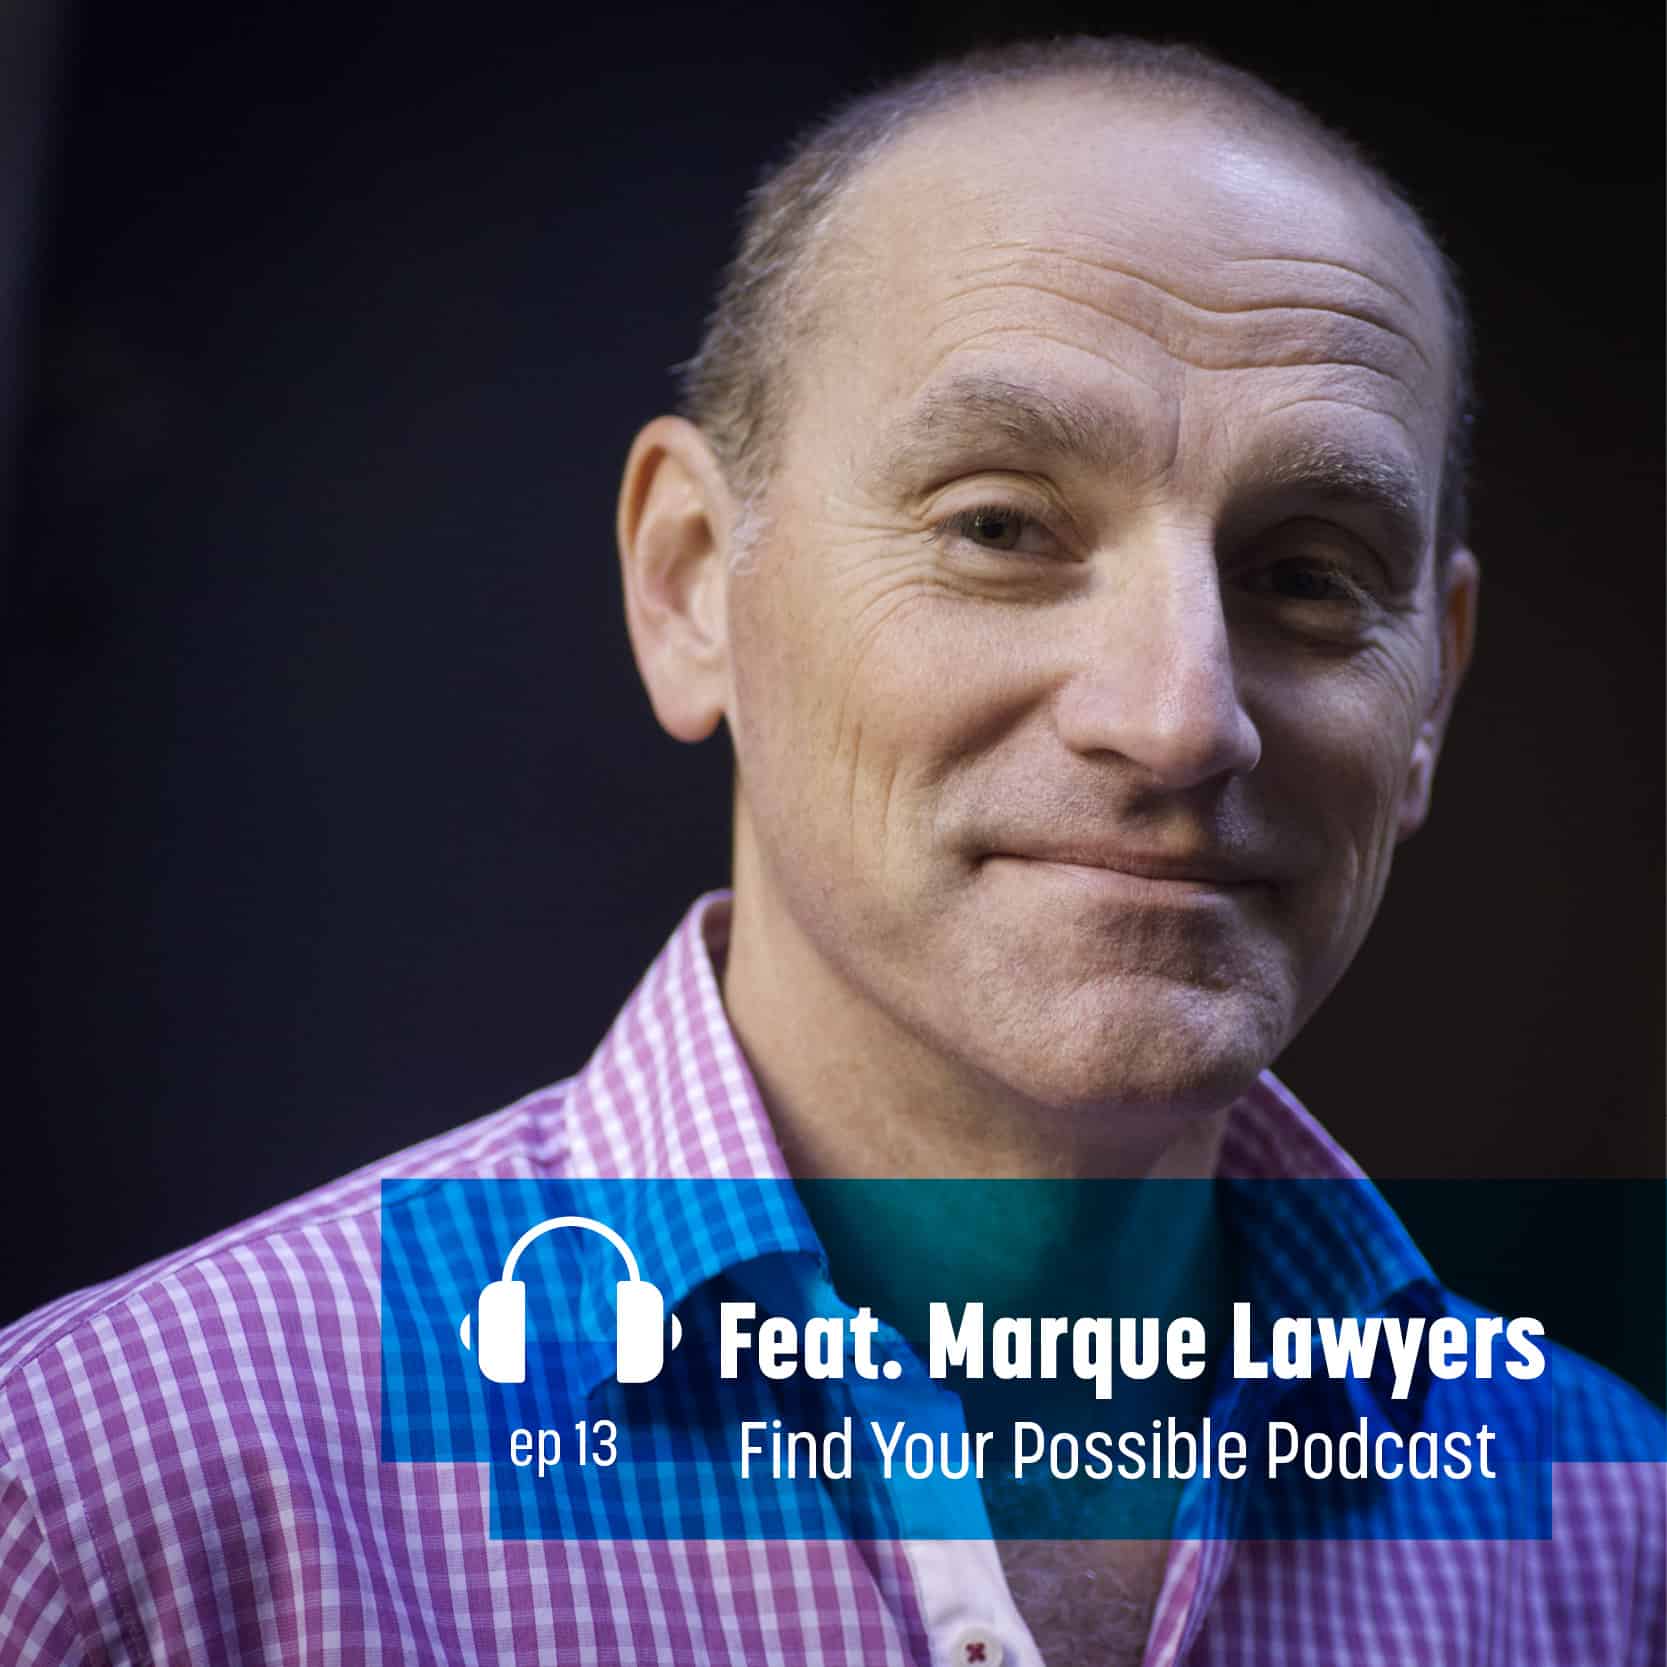 Michael Bradley, Marque Lawyers, Purpose Driven Business, Mezzanine Find Your Possible Podcast Ep13